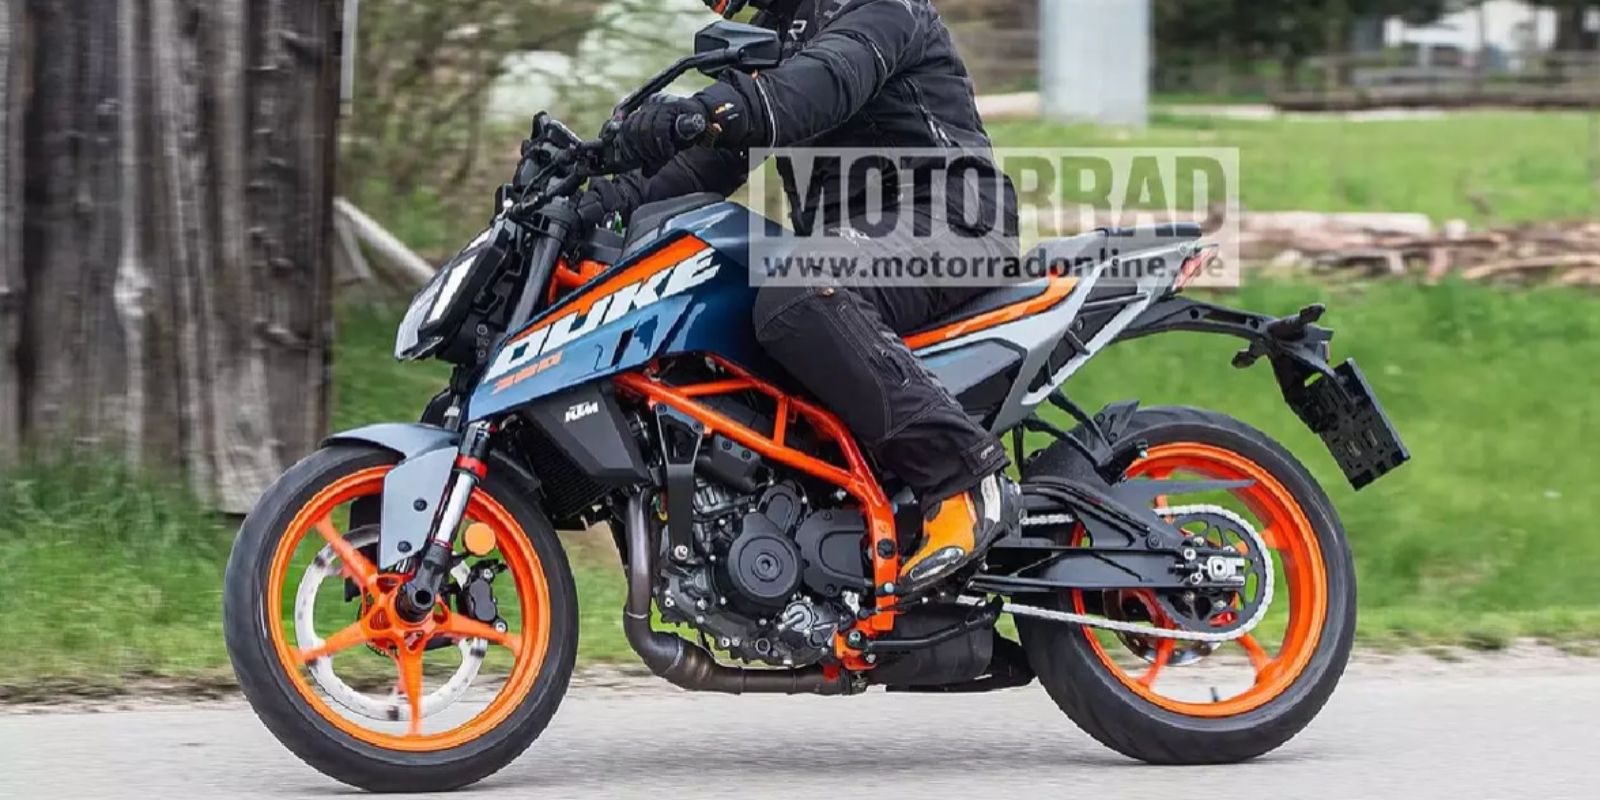 ProductionSpec New KTM 390 Duke Spied Undisguised Top 5 Things